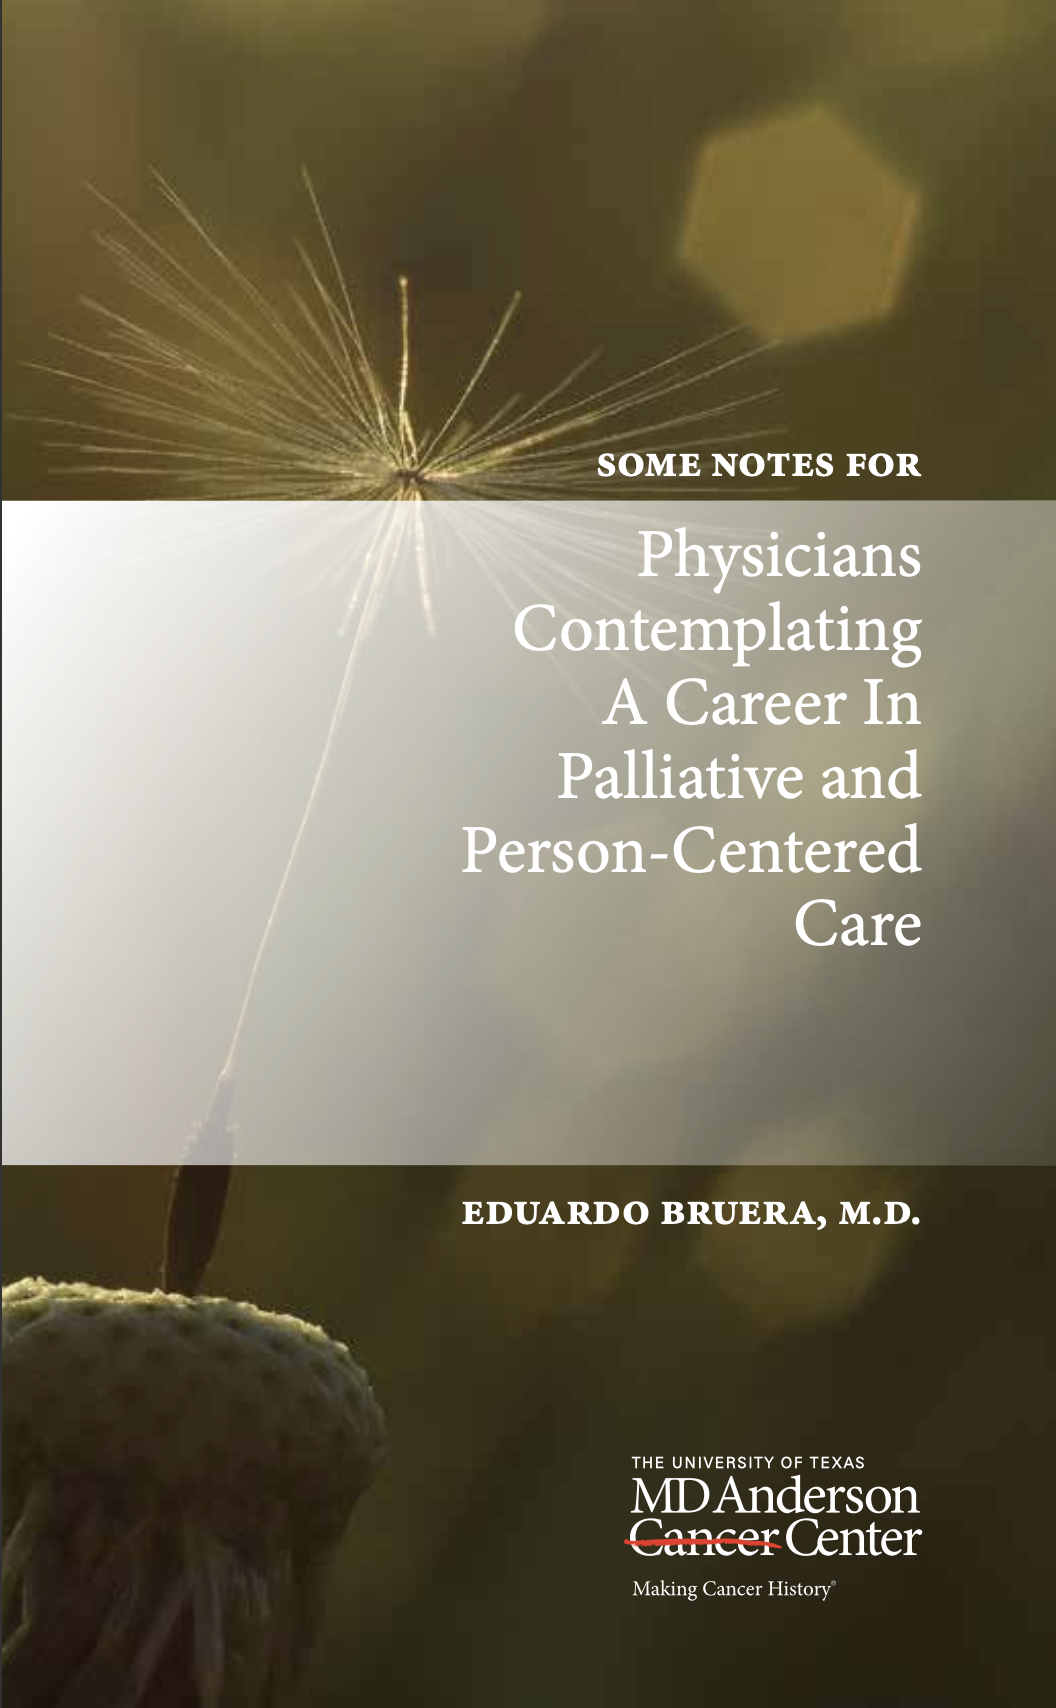 Physicians Contemplating A Career In Palliative and Person-Centered Care